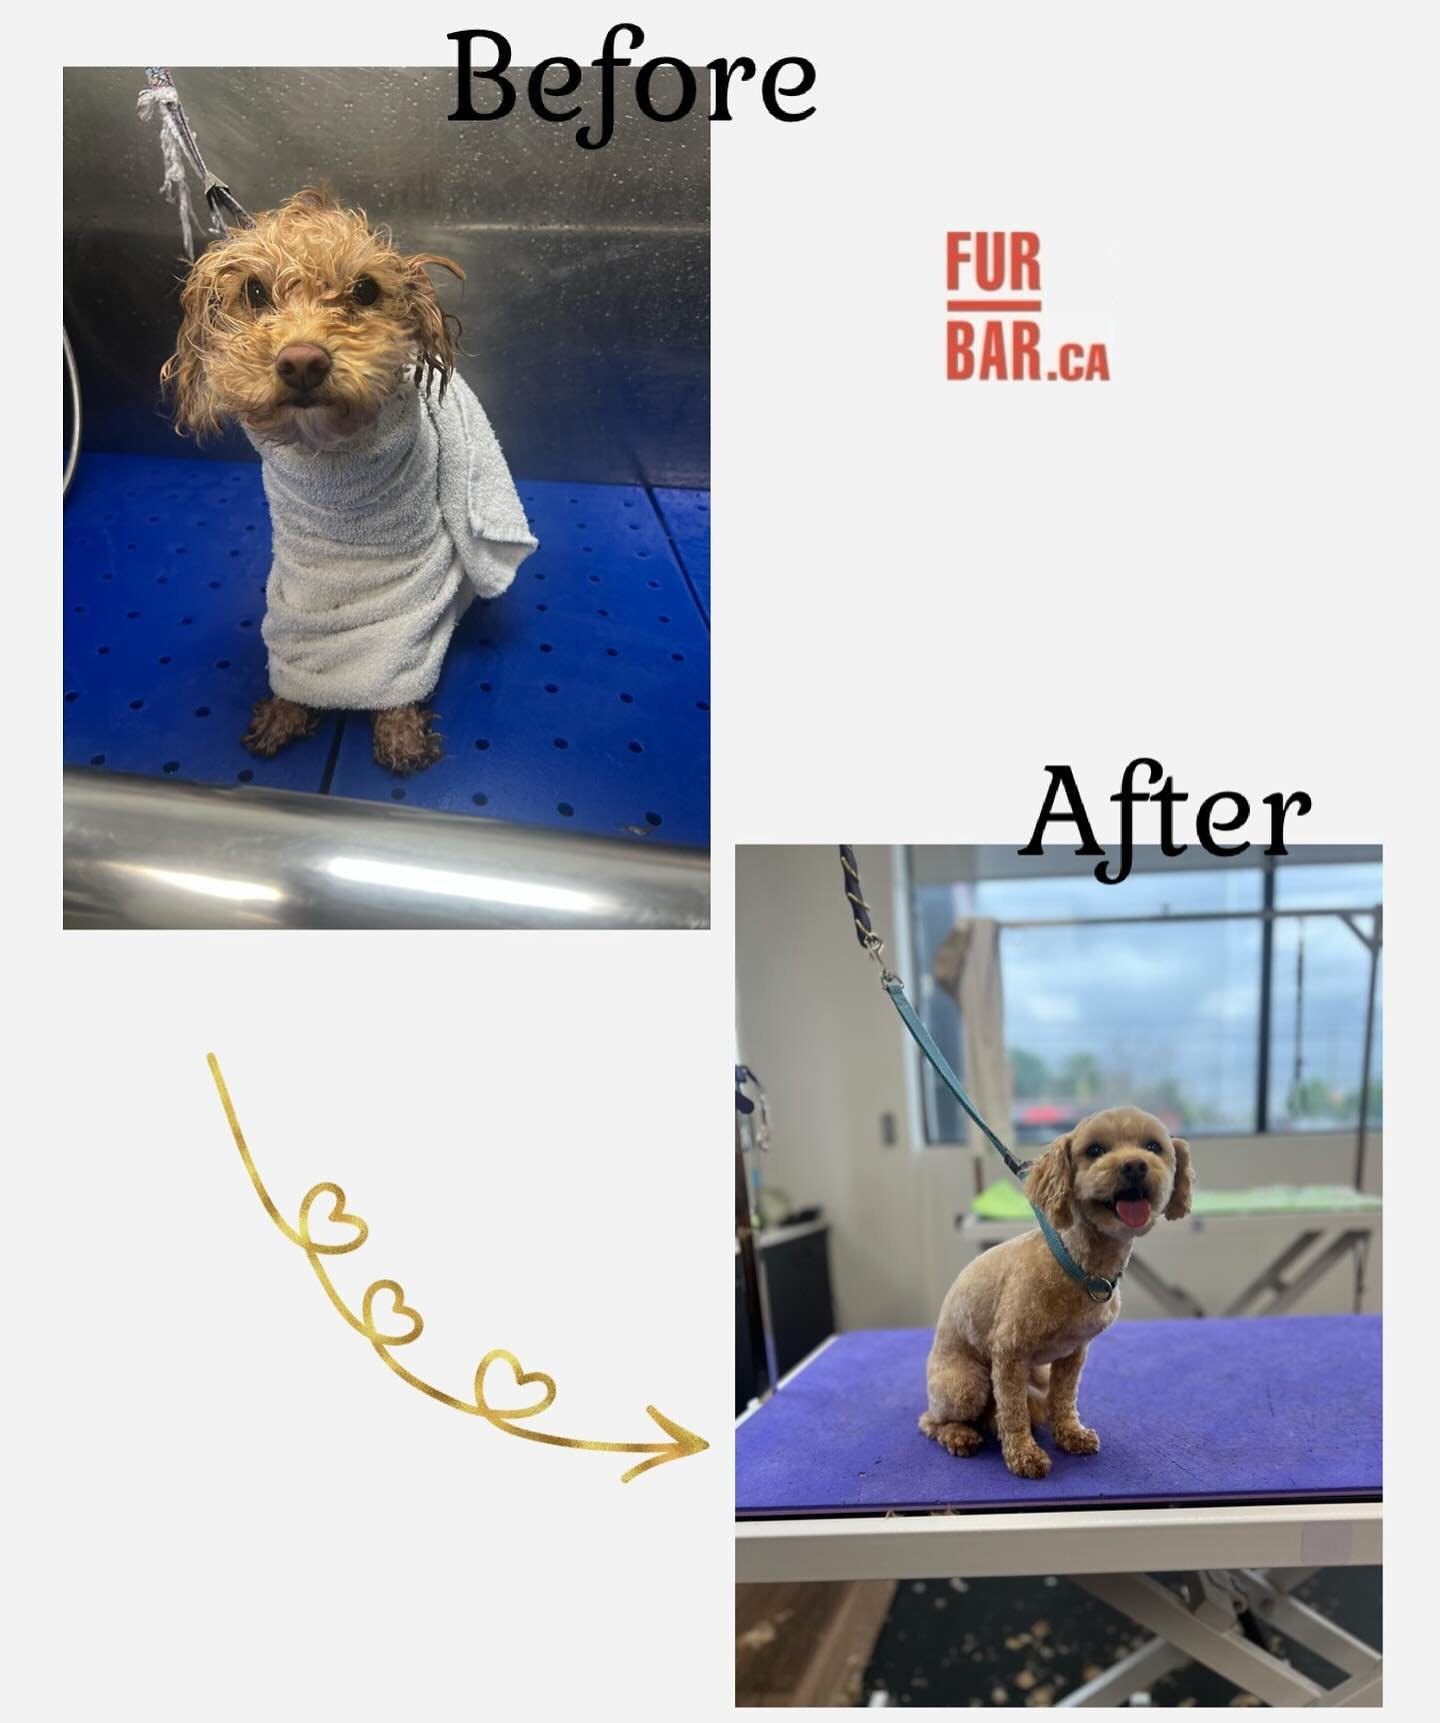 Oh Daisy 🌼!
It was love at first sight &hearts;️
Groomed by 𝗡𝘂𝗿𝗶𝗮
#daisy #cutie #goodgirl #sweet #amazing #poodle #love #grooming #groomingsalon #furbar #furbarpetgrooming #pets #toronto #northyork